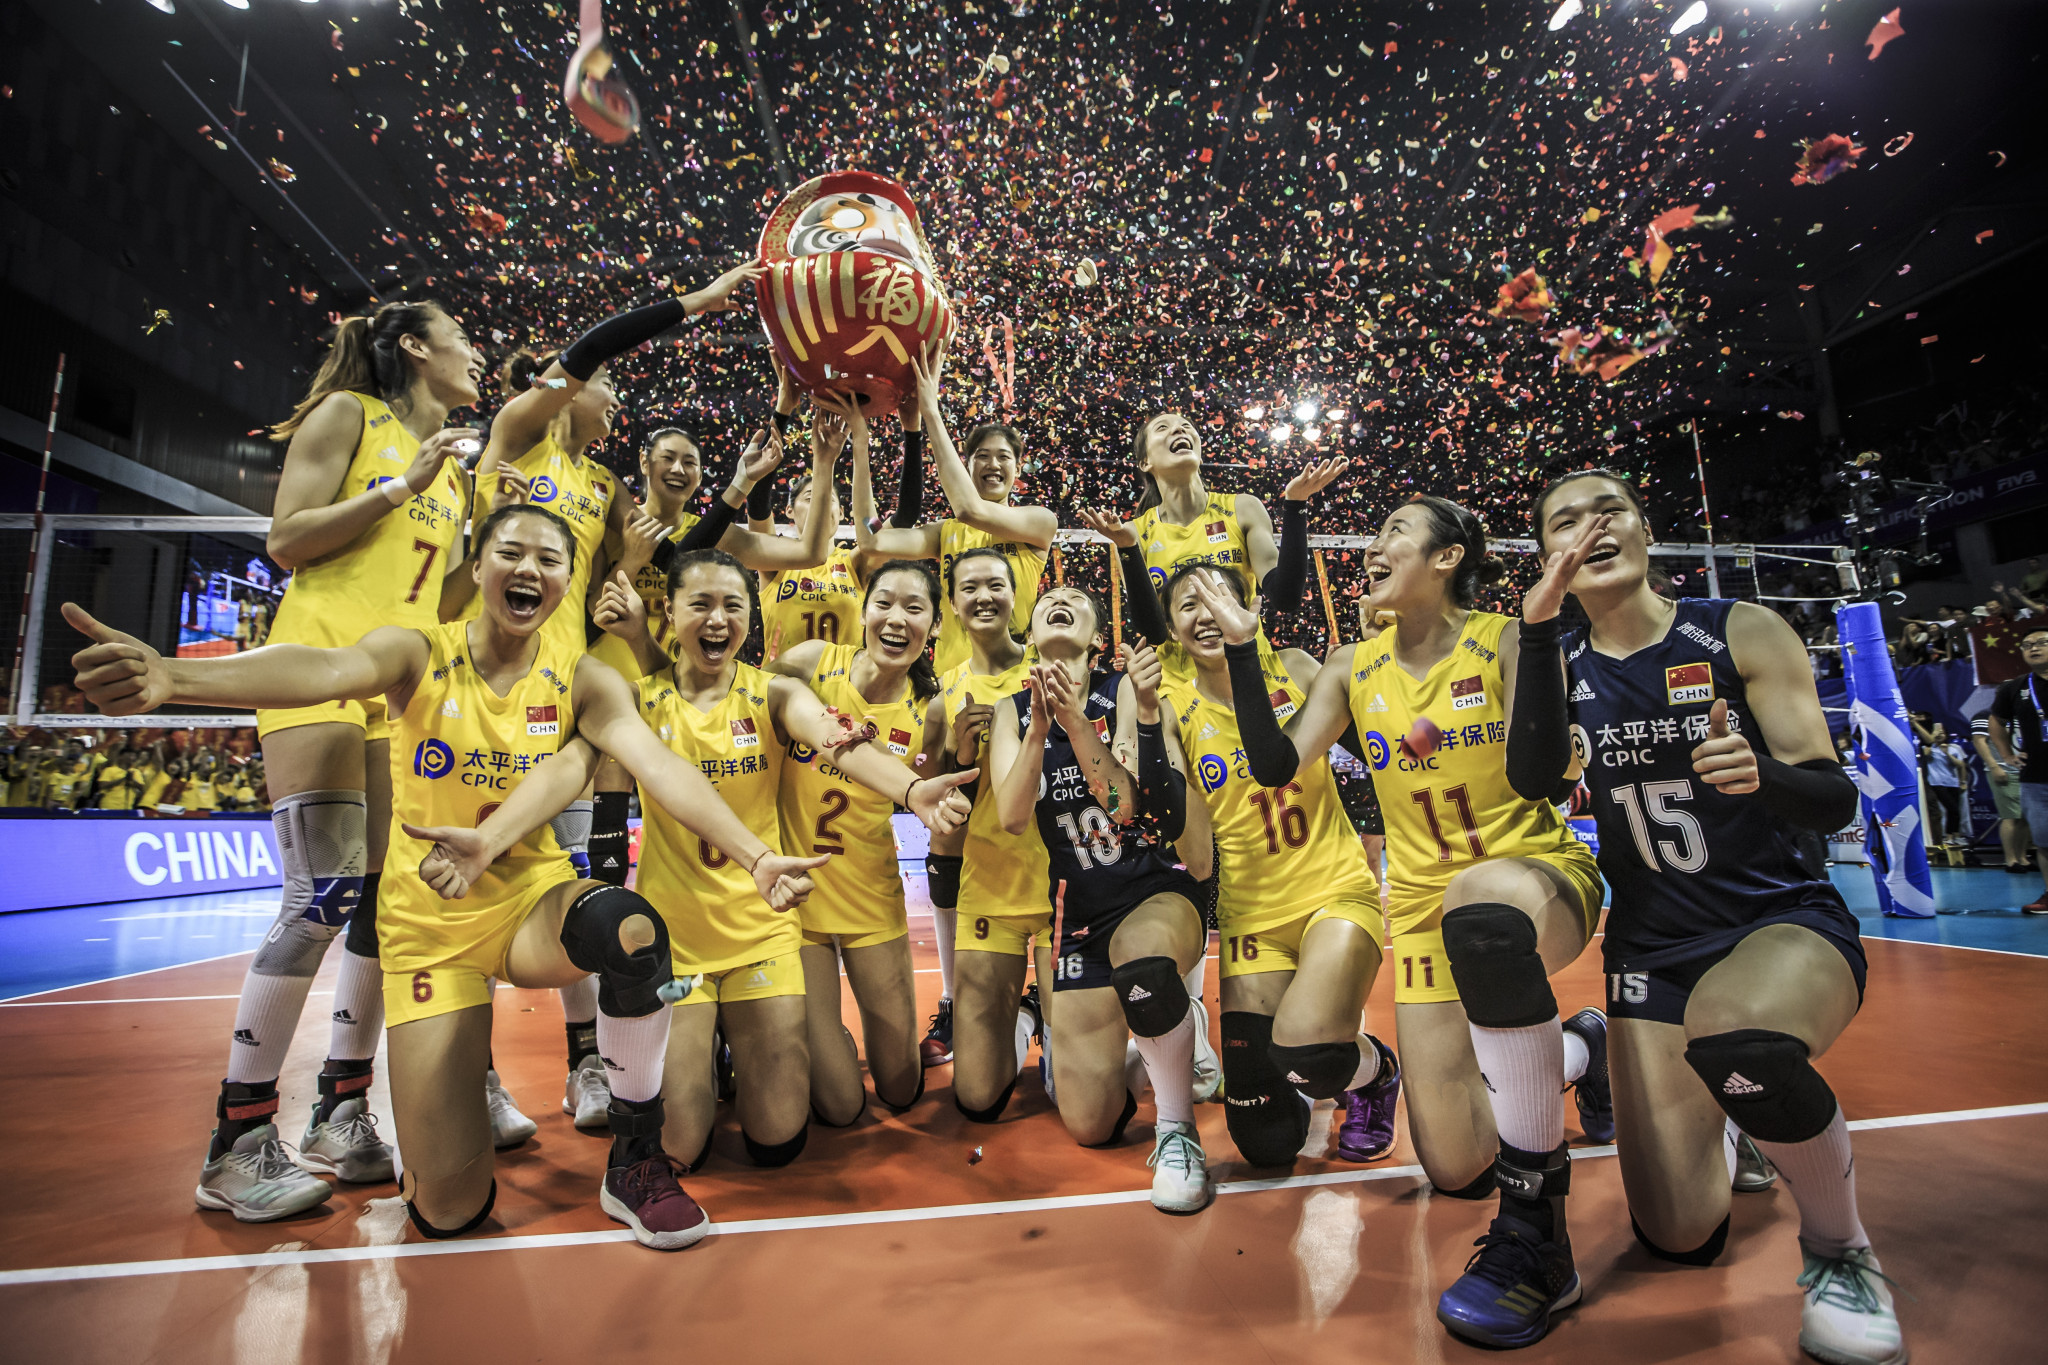 Women's volleyball Olympic champions China qualified to Tokyo 2020 following victory Ningbo ©FIVB